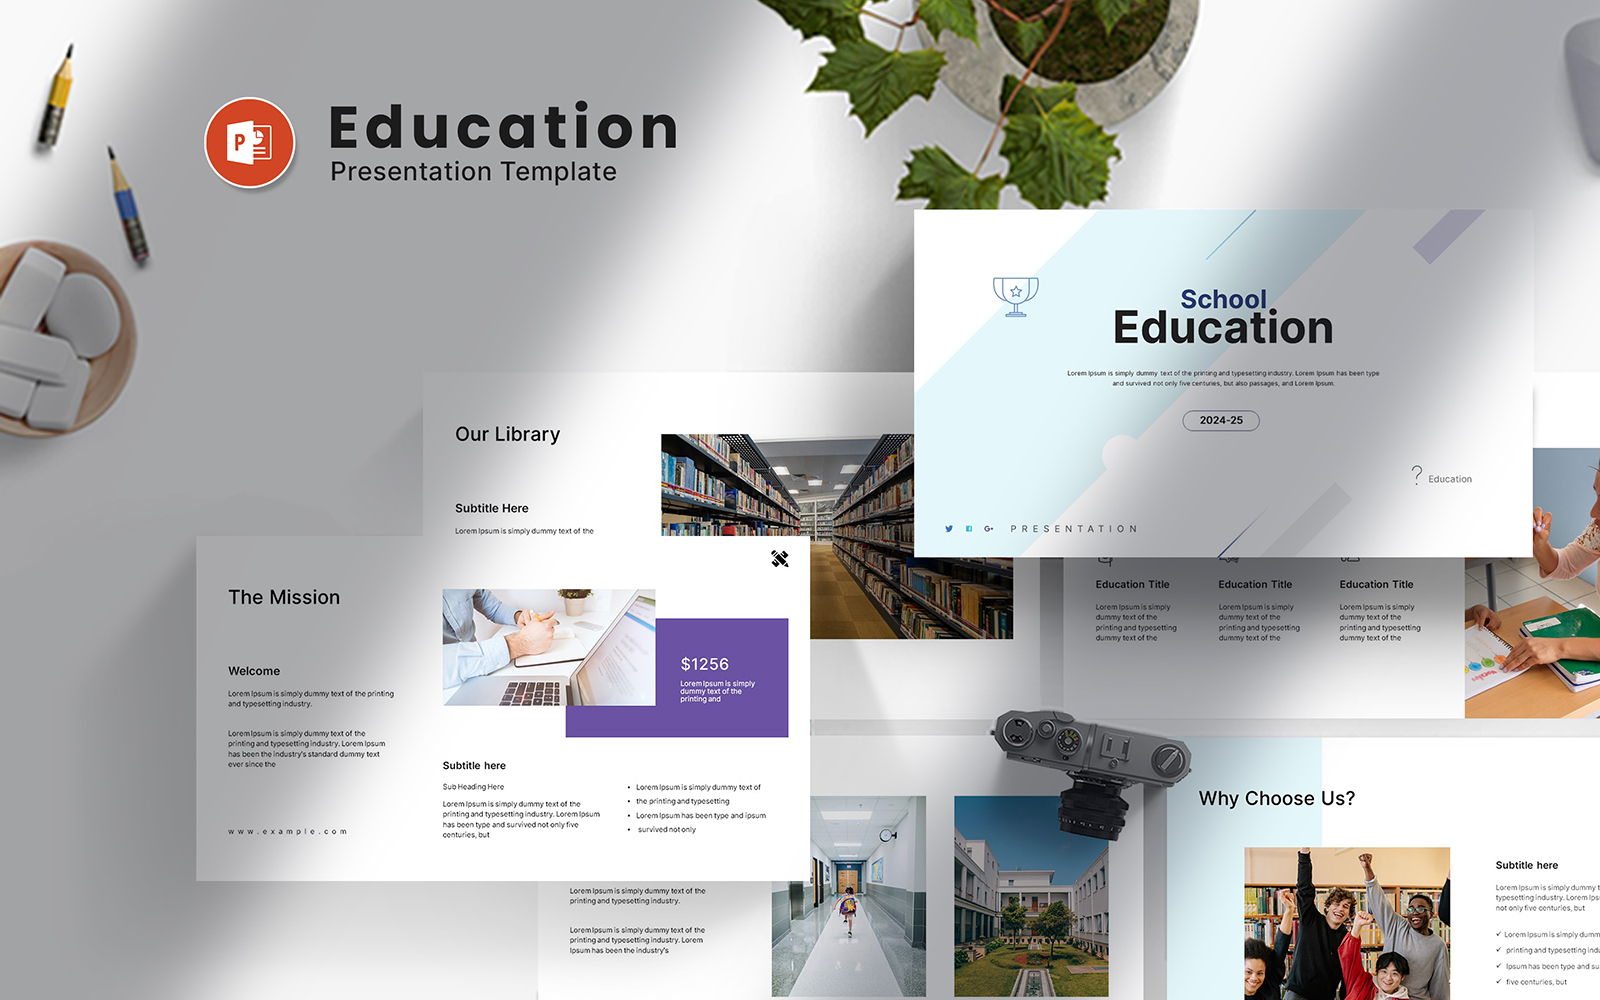 The Education PowerPoint Presentation Template Layout